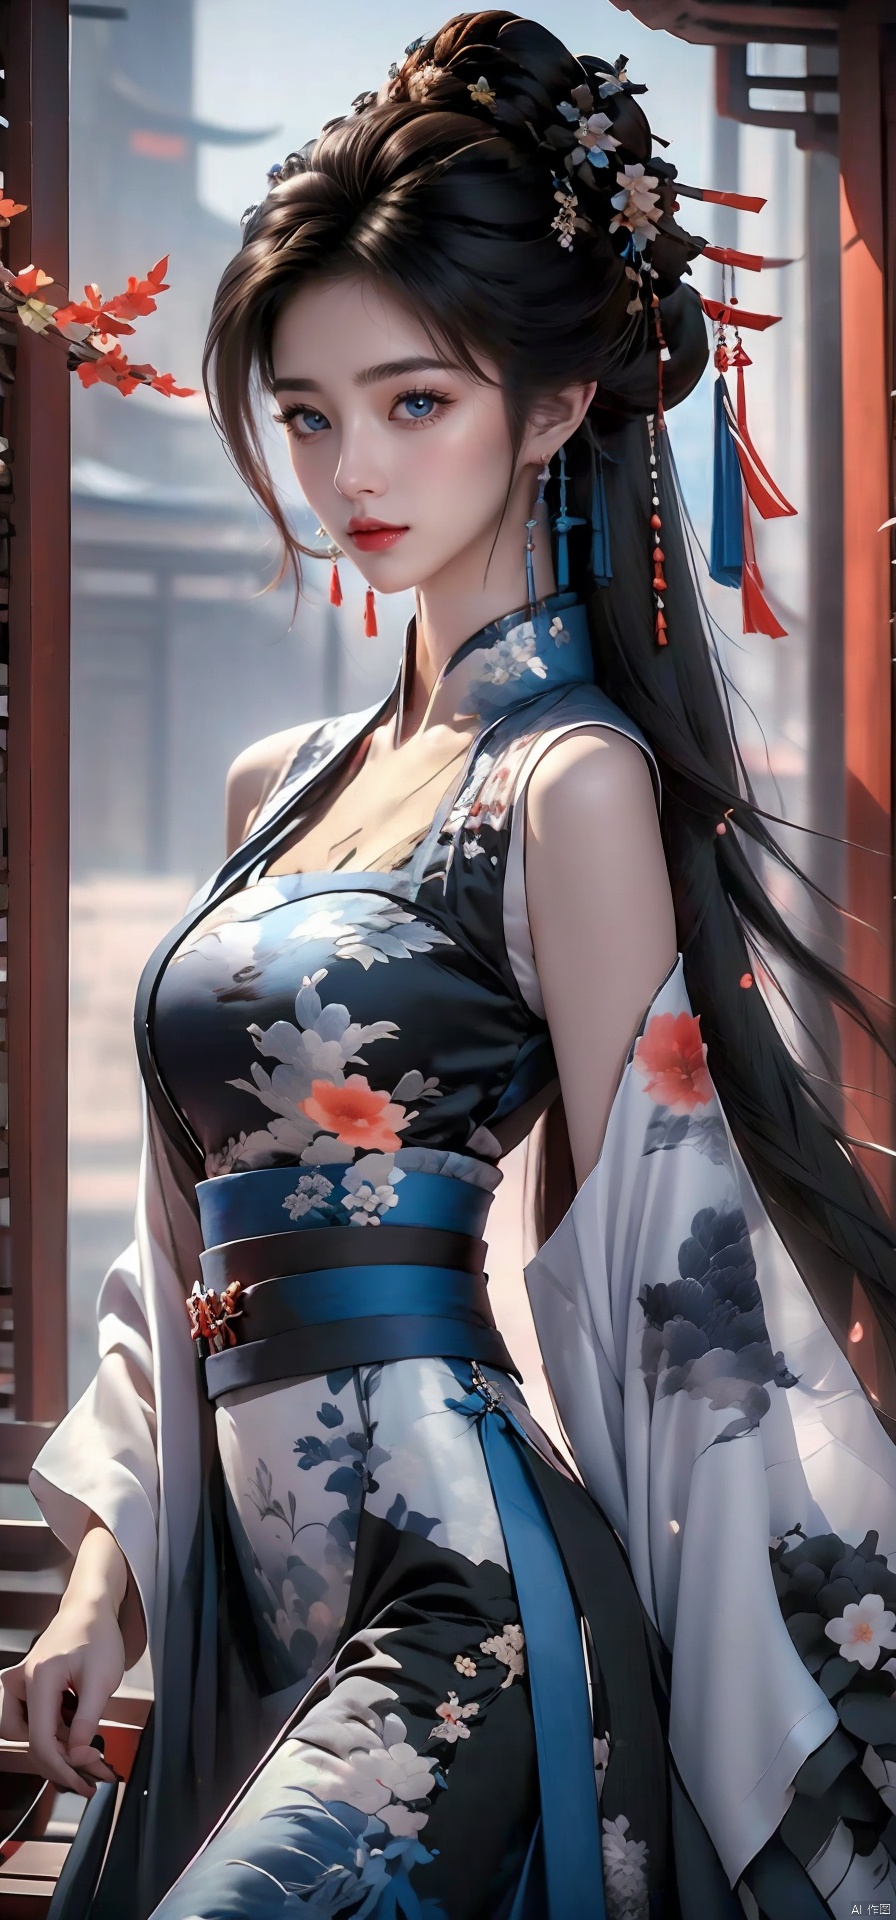 A alluring woman from the Later Liao Dynasty, with her black hair styled in a classic updo, stands in a bustling city street. She is wearing a sleeveless ink painting dress with a vibrant floral print, and her arms are gracefully at her sides. Her lips are painted a vibrant red, and her eyes are a piercing blue. The background is a blurred scene of the lively city, capturing the era’s energetic and diverse atmosphere.